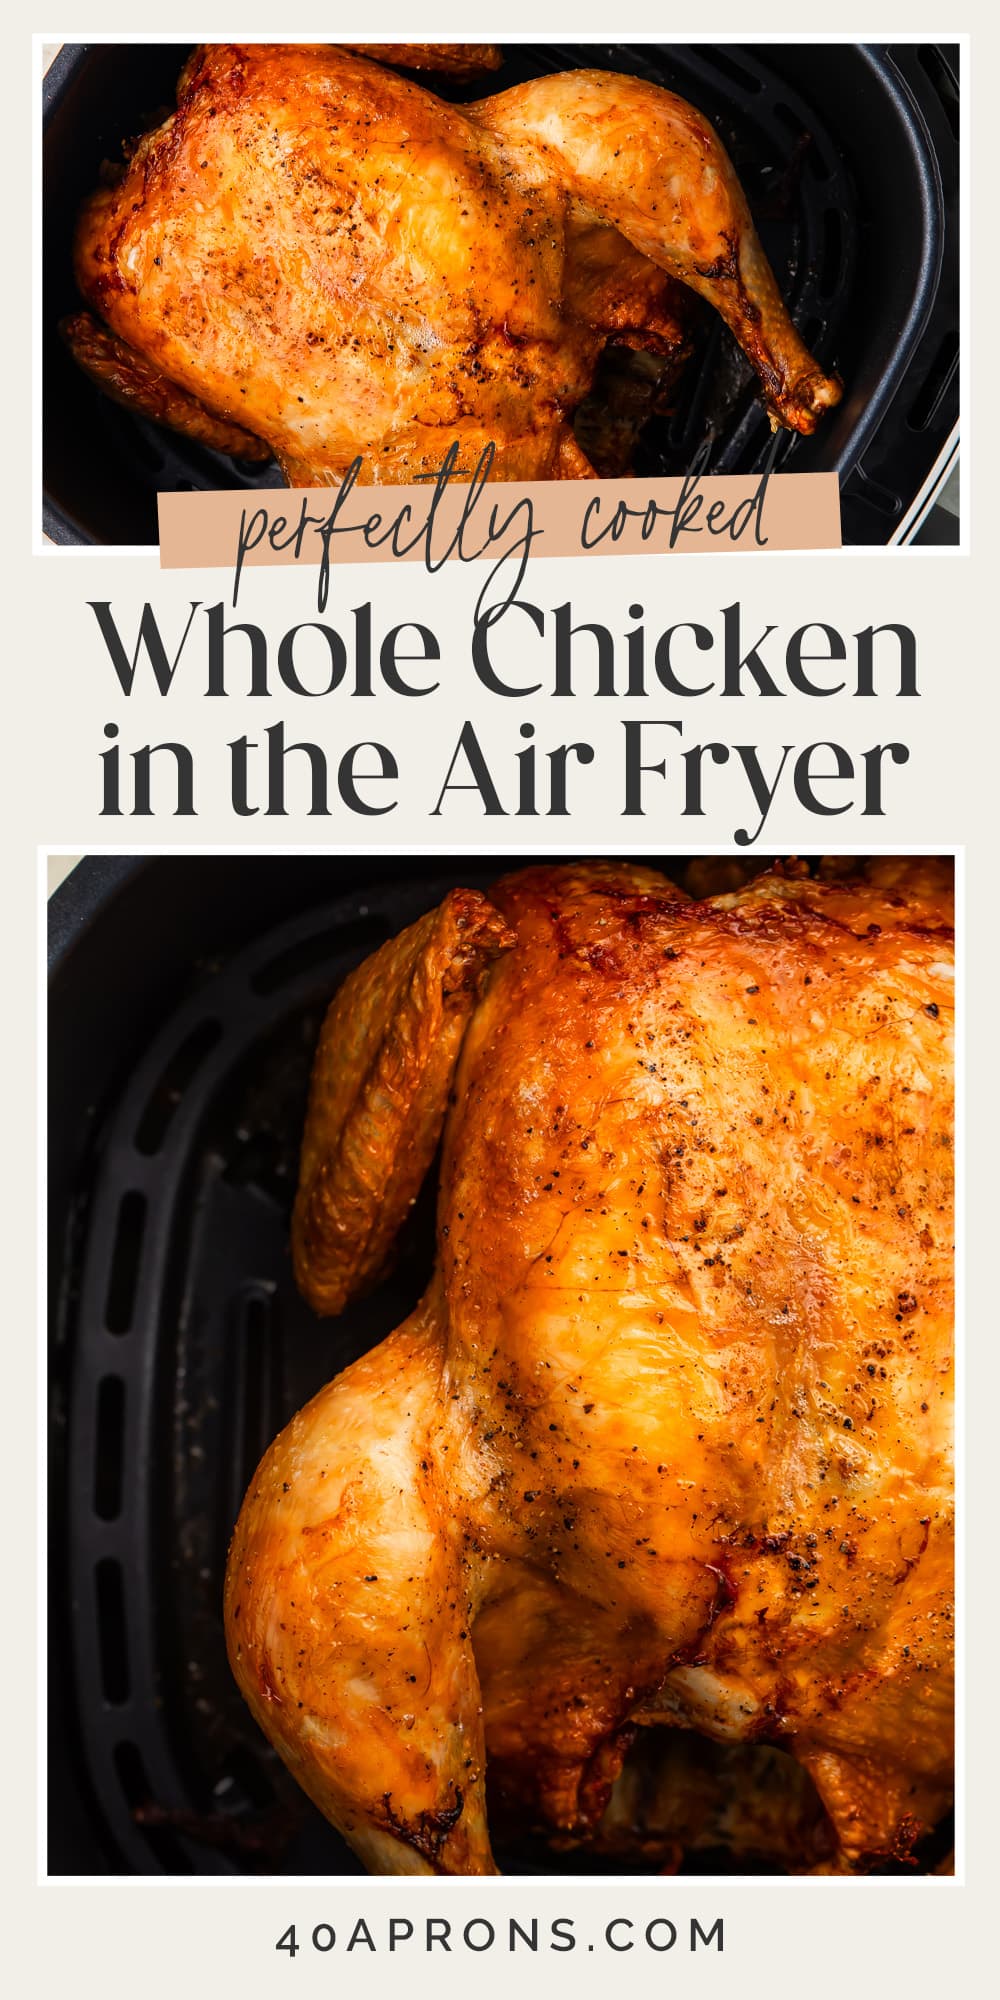 Pin graphic for air fryer whole chicken.